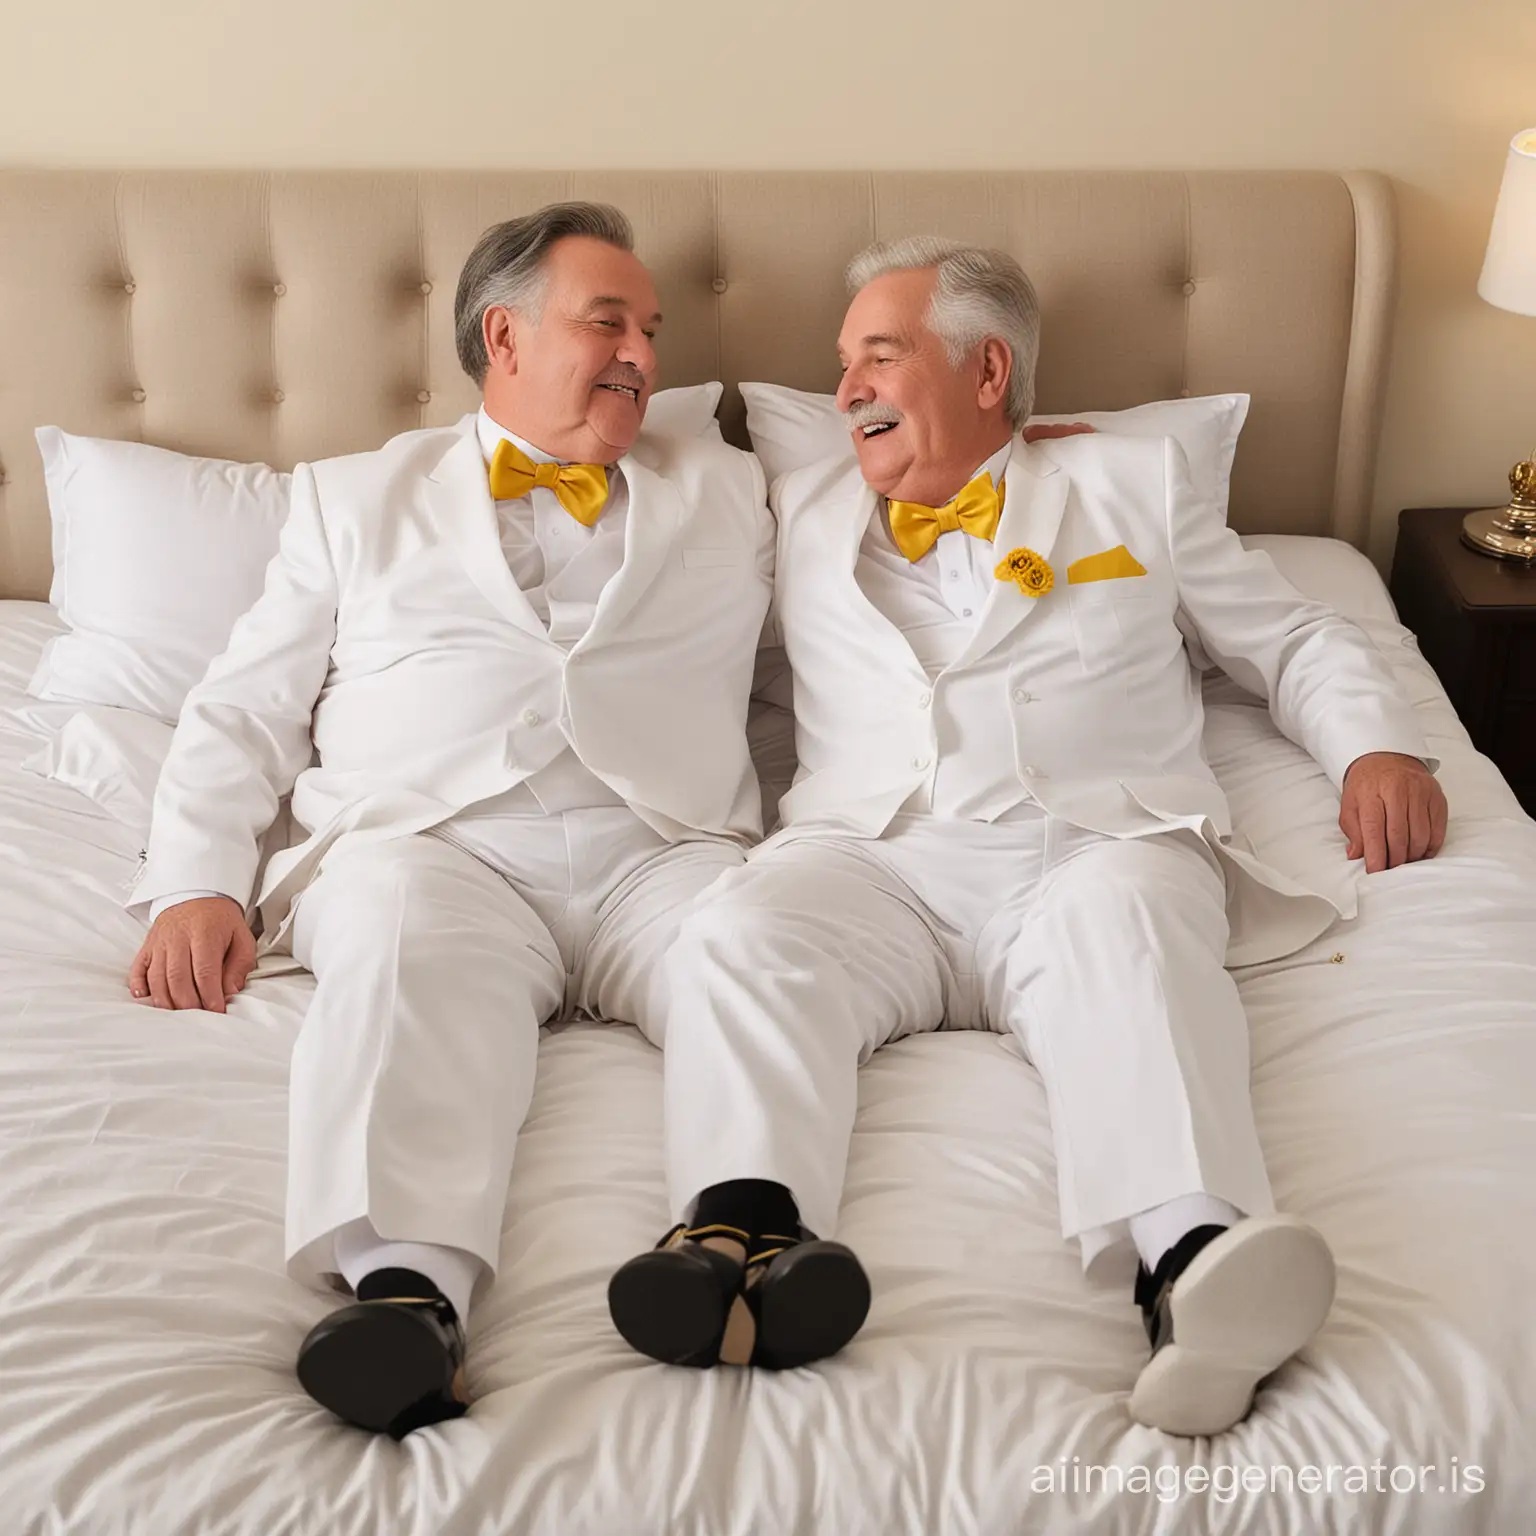 Two American chubby elderly men, both 80 years old, shot height, wearing white suits, yellow bowties, black socks, black loafers, black hair, laying on a bed in the bedroom, fondling and kissing, full body shot, must show face